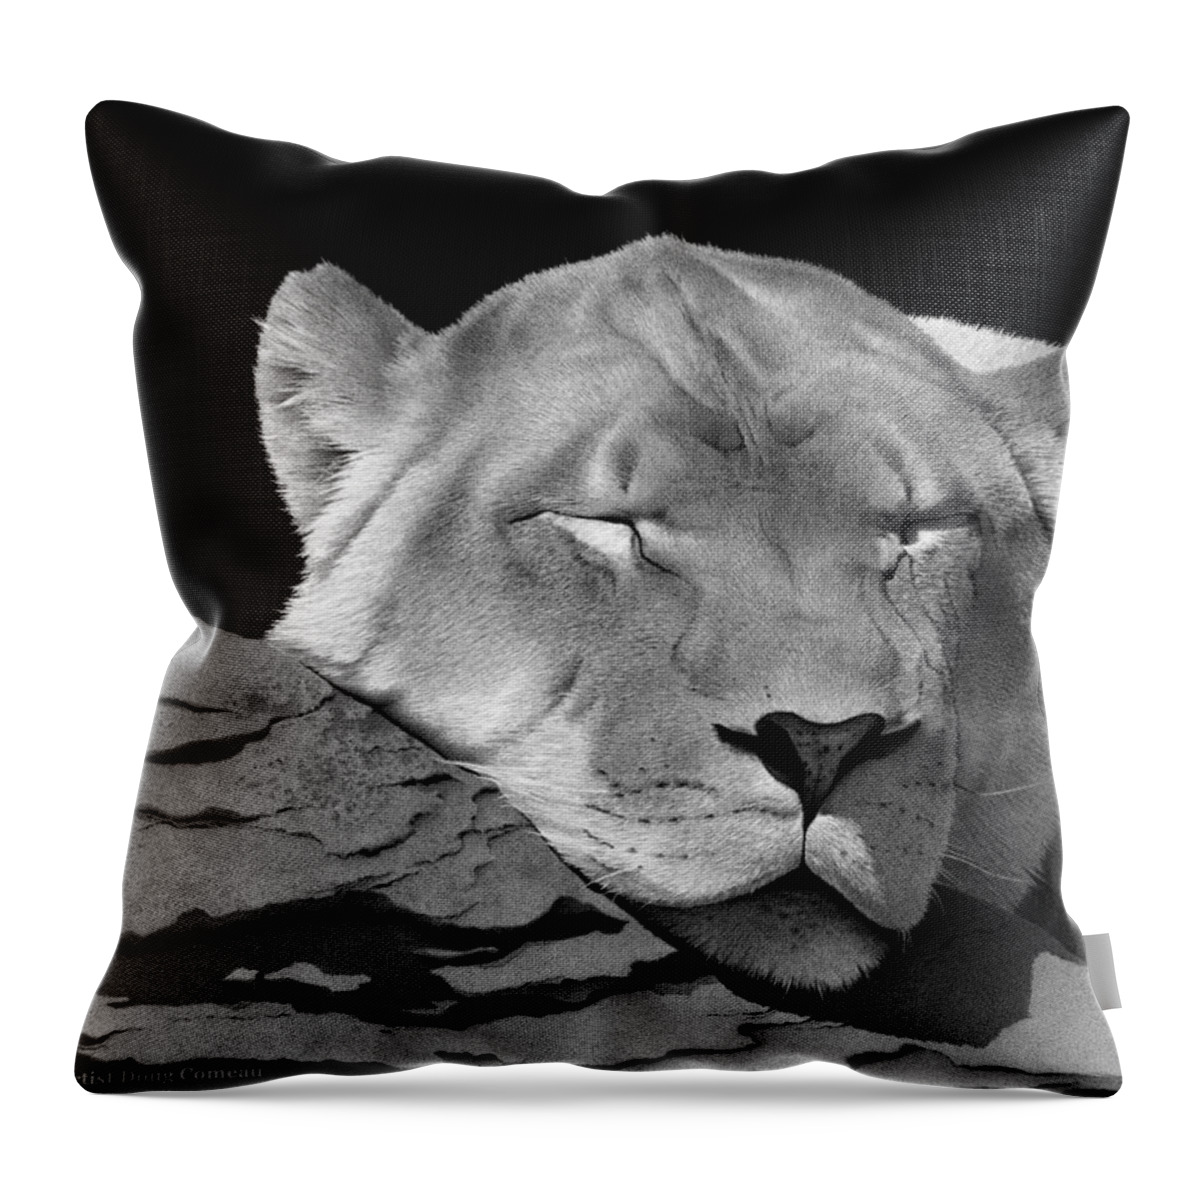 Lion Throw Pillow featuring the drawing Drifting Off by Stirring Images